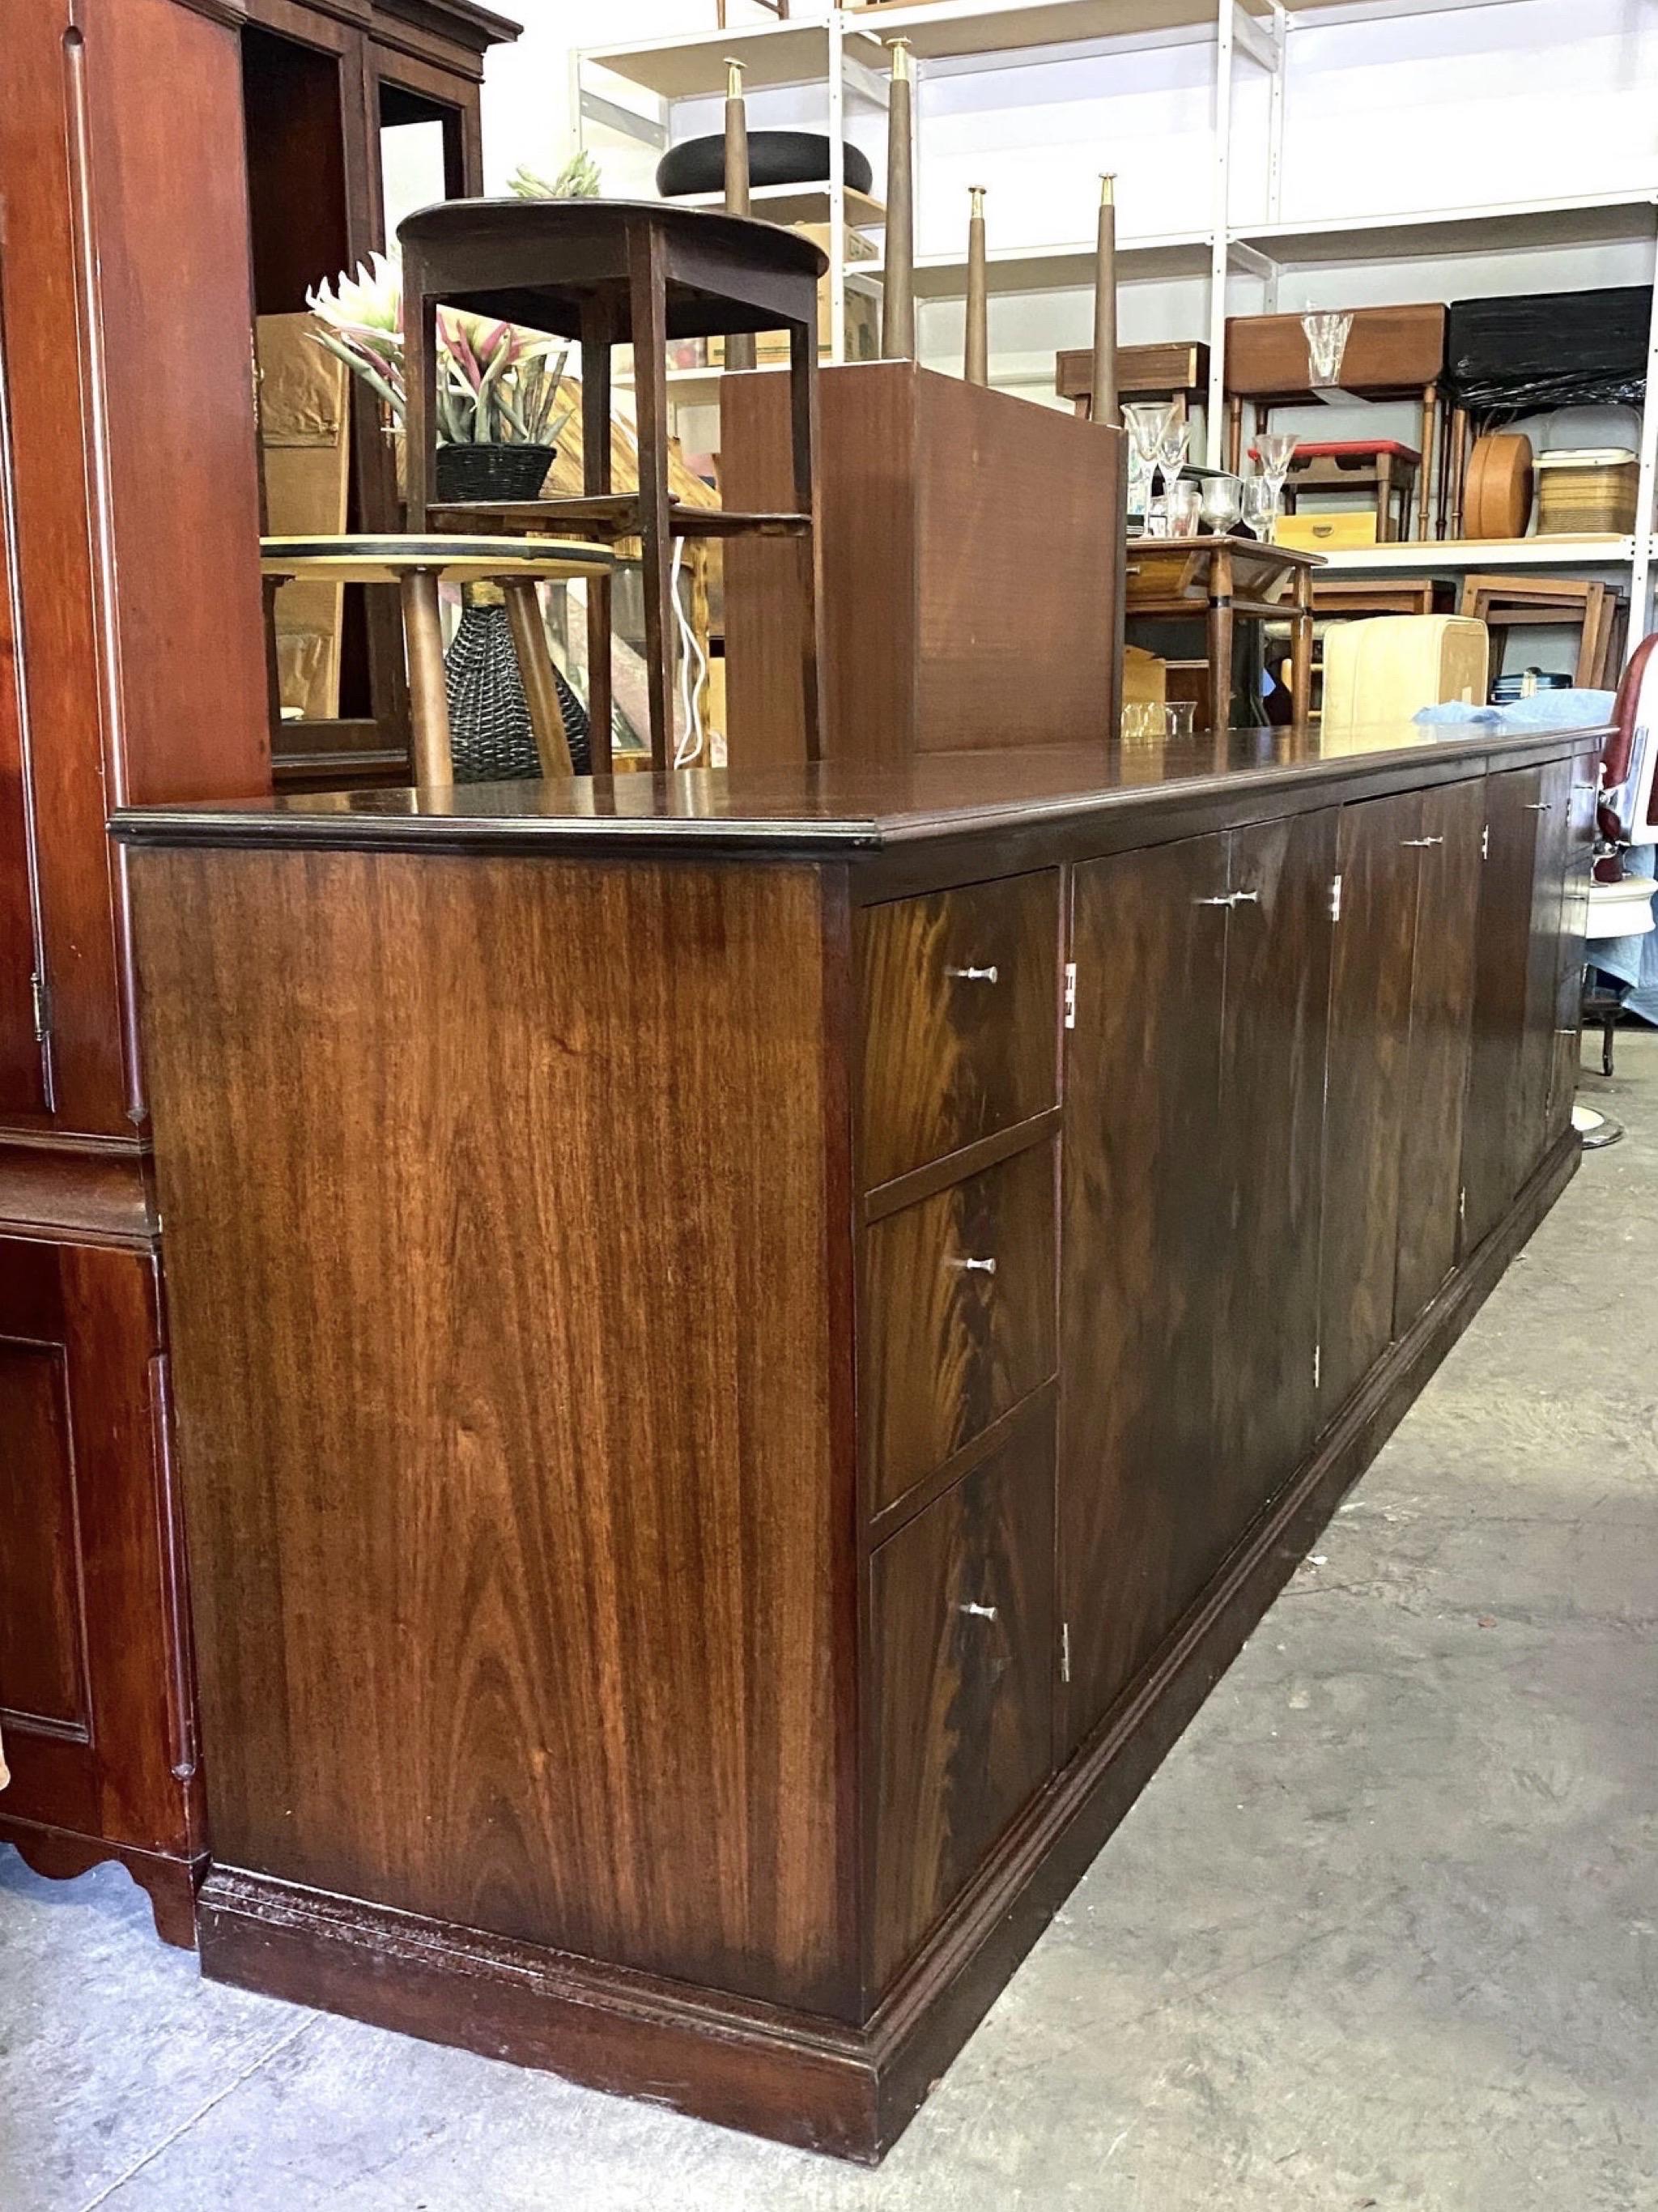 This extra long credenza was custom built for a high end car dealership. It has 3 drawers on each end and 3 double door cabinets, providing tons of storage. This is a near flawless piece and in the right settings, is so functional. Would look great